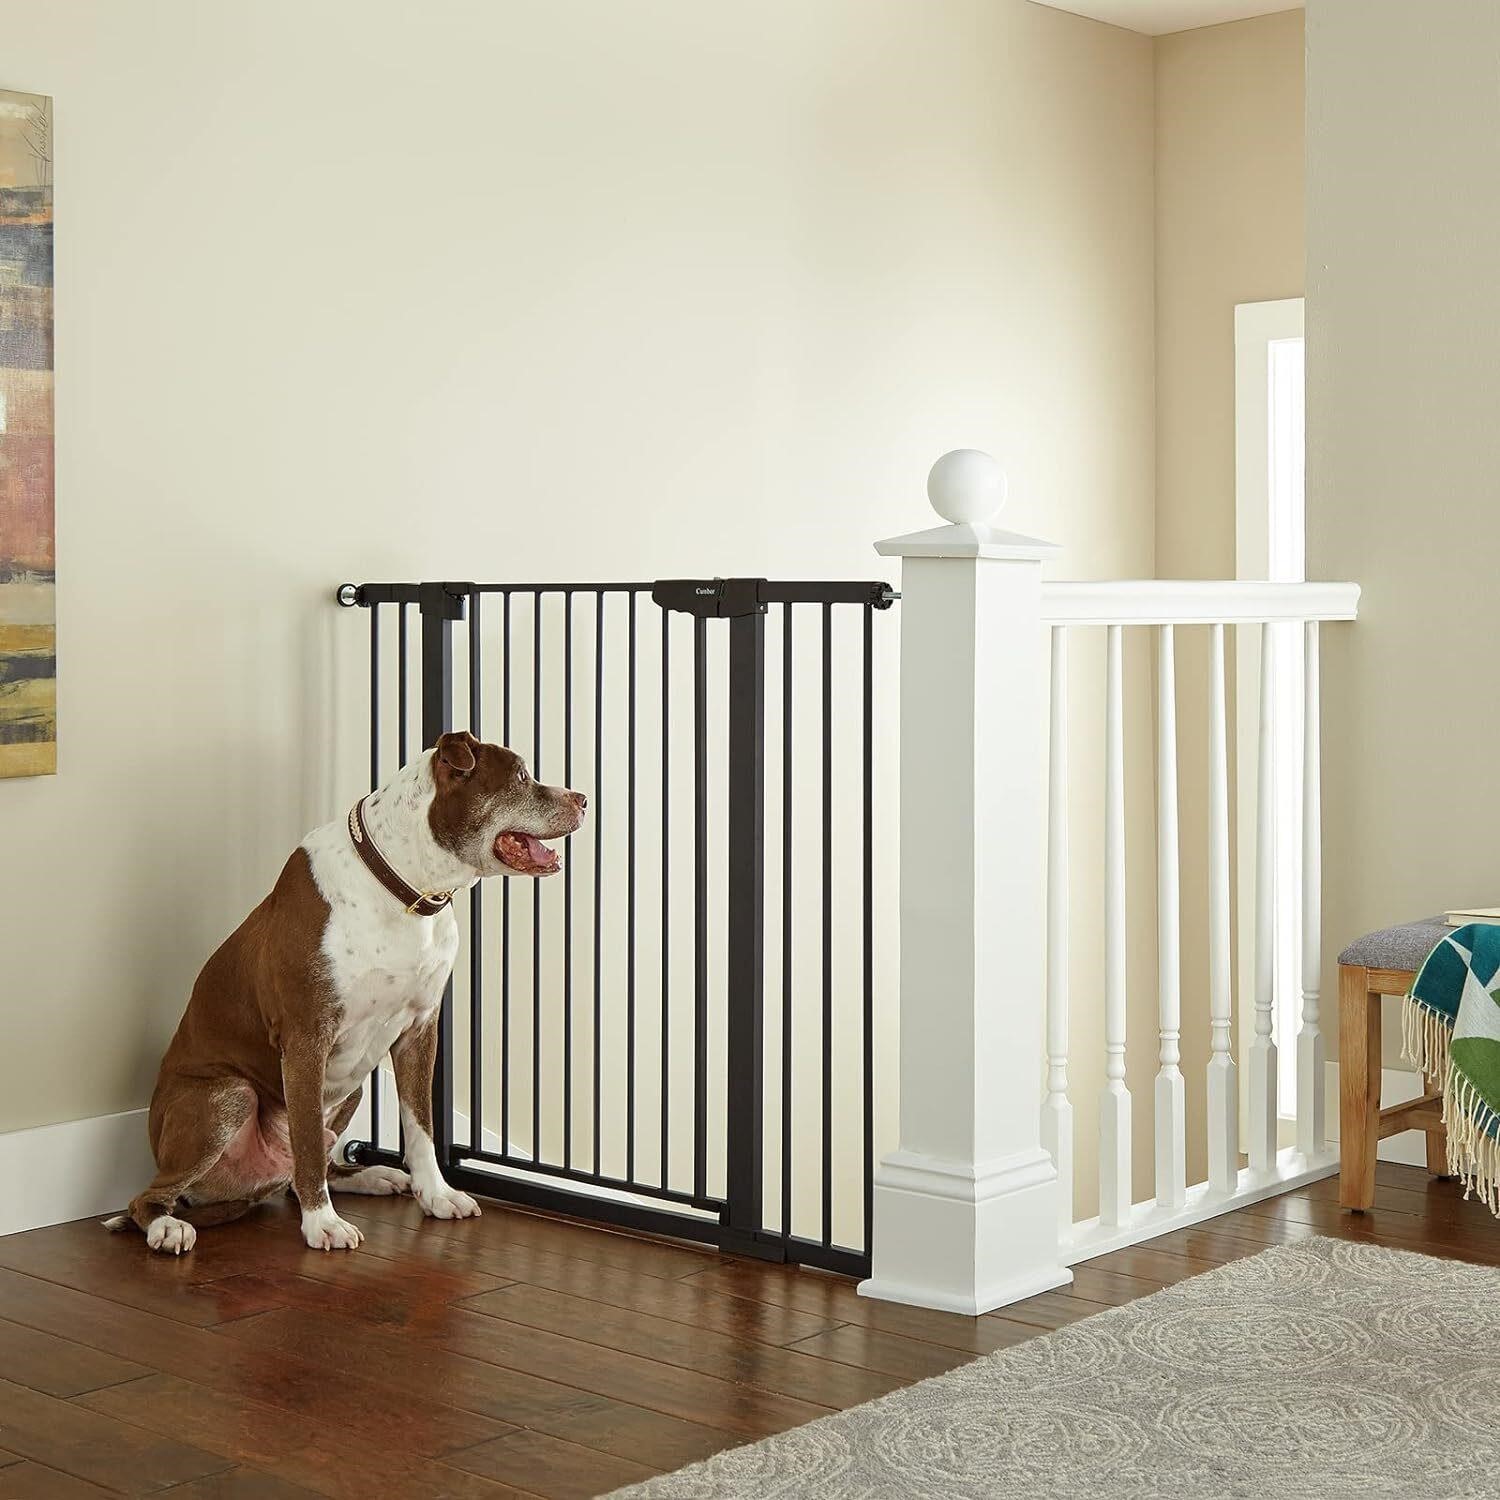 Cumbor 36 Extra Tall Baby Gate for Dogs and Kids w